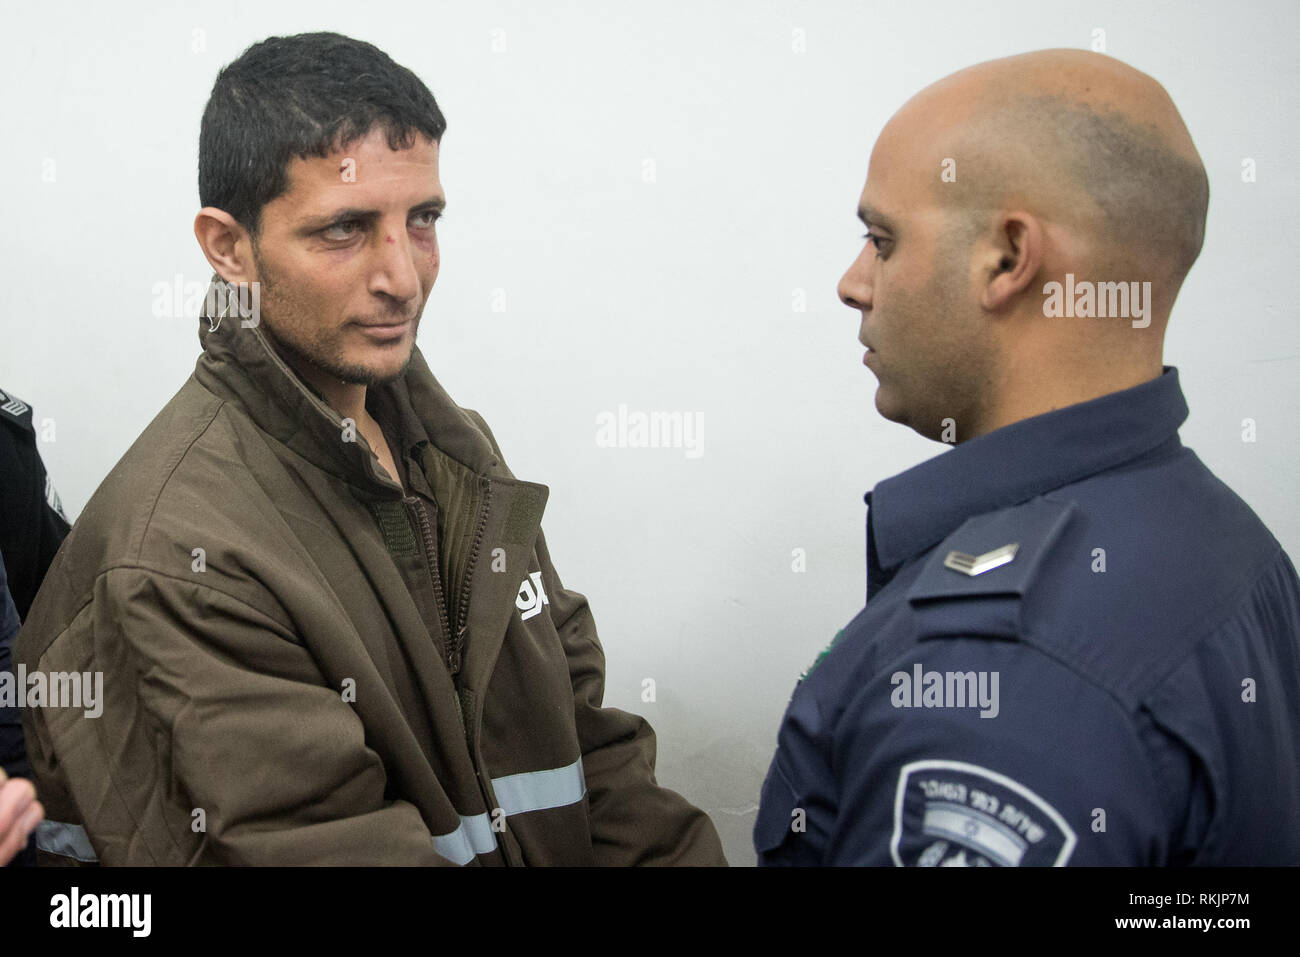 Jerusalem. 11th Feb, 2019. Arafat Irfayia (L) appears at a courtroom in Jerusalem, on Feb. 11, 2019. Israel's Shin Bet security service said on Sunday that the killing of a young Israeli woman last week was a 'terrorist attack' carried out by Arafat Irfayia. The Shin Bet said that the interrogation of Arafat Irfayia, arrested on Friday in the West Bank city of Ramallah, showed the killing was nationalistically-motivated. Credit: JINI/Xinhua/Alamy Live News Stock Photo